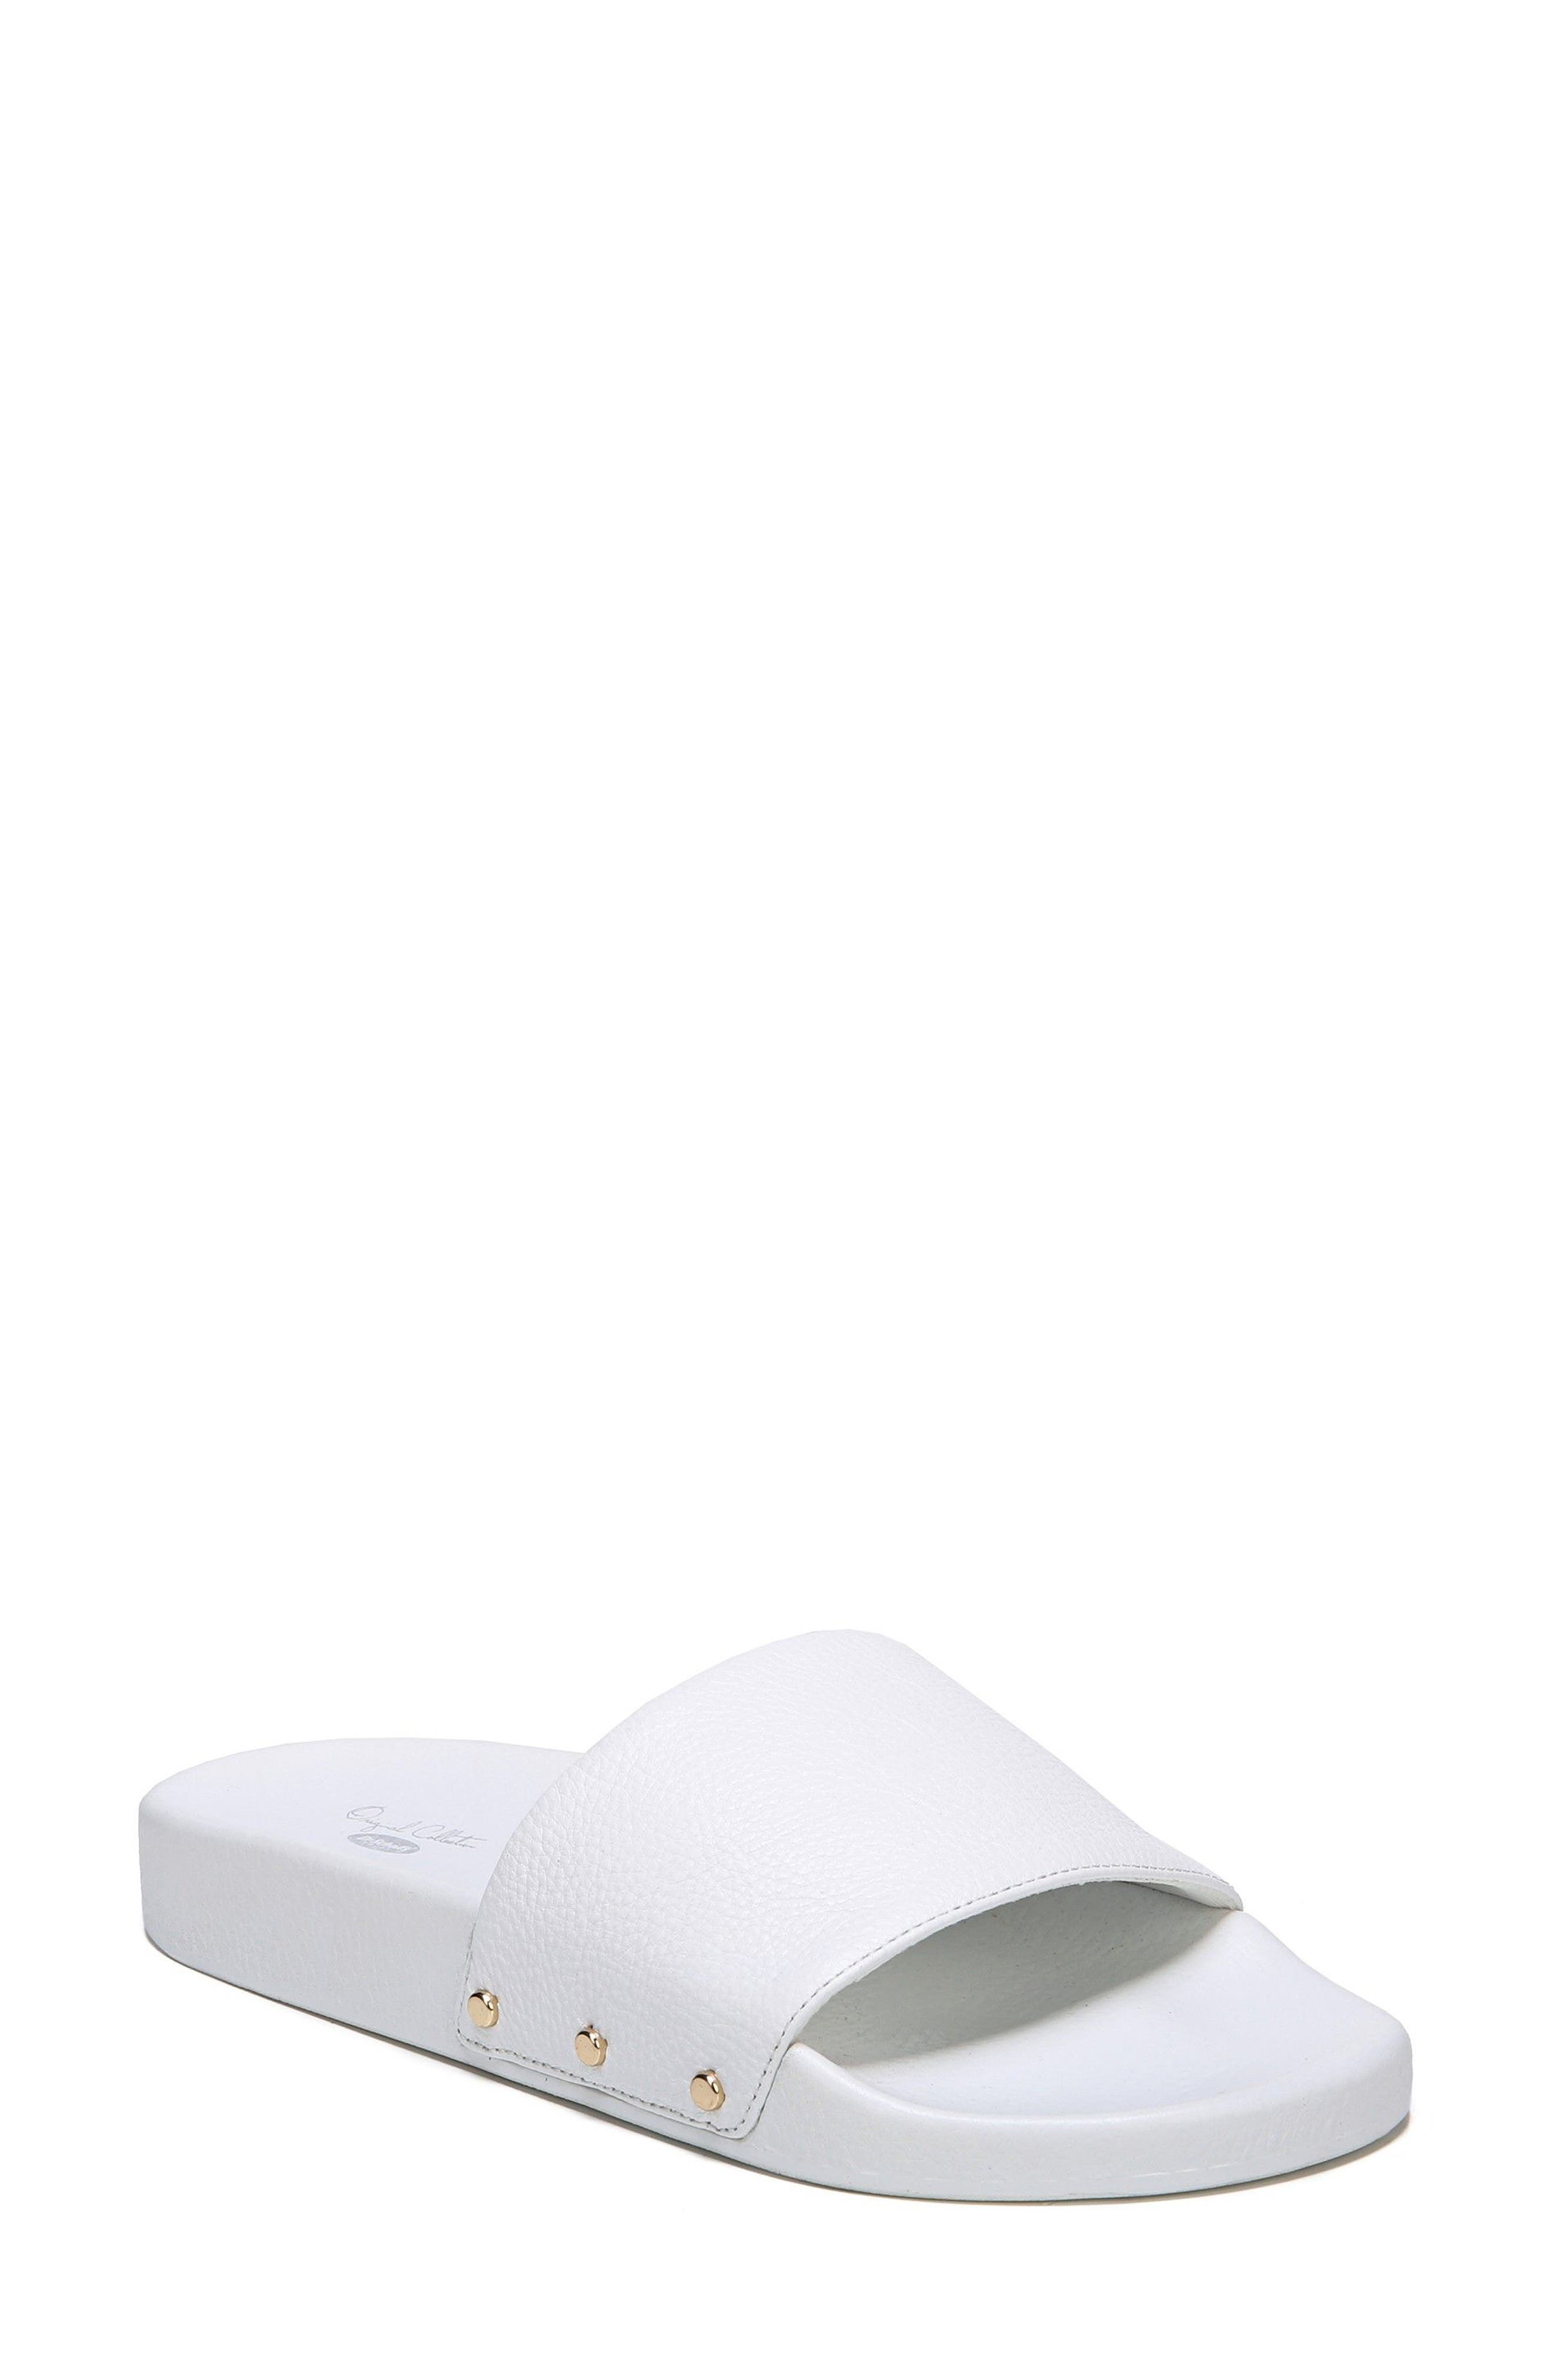 Dr. Scholl's Pisces Slide Sandal in White Leather